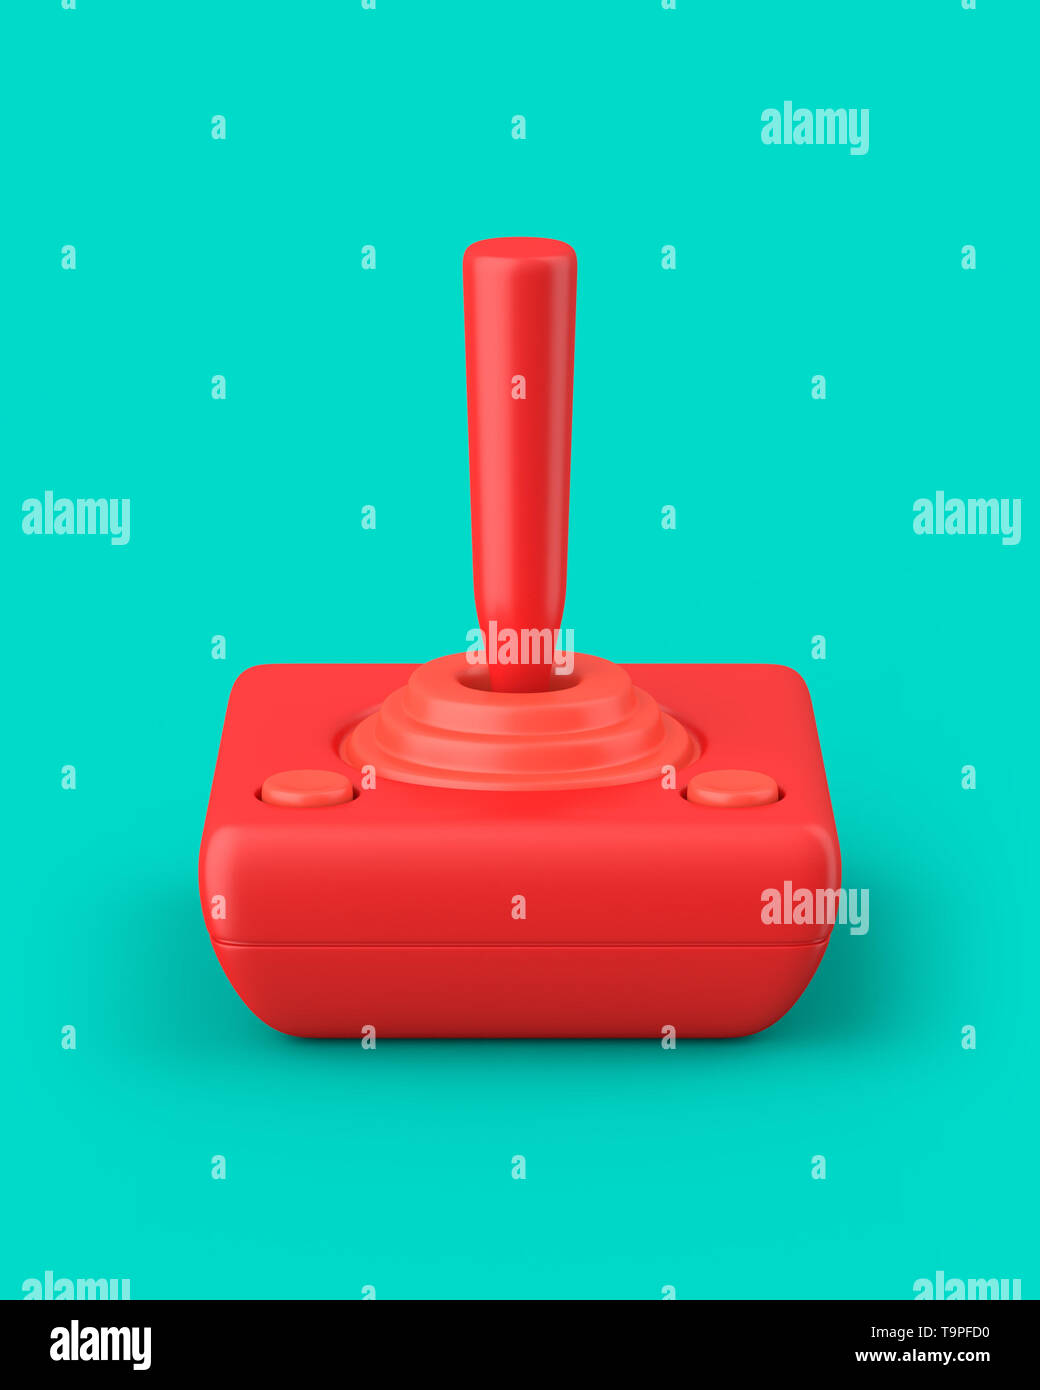 Red retro joystick on an aqua background. 3d render. Angled view. Kitsch Art Series. Stock Photo